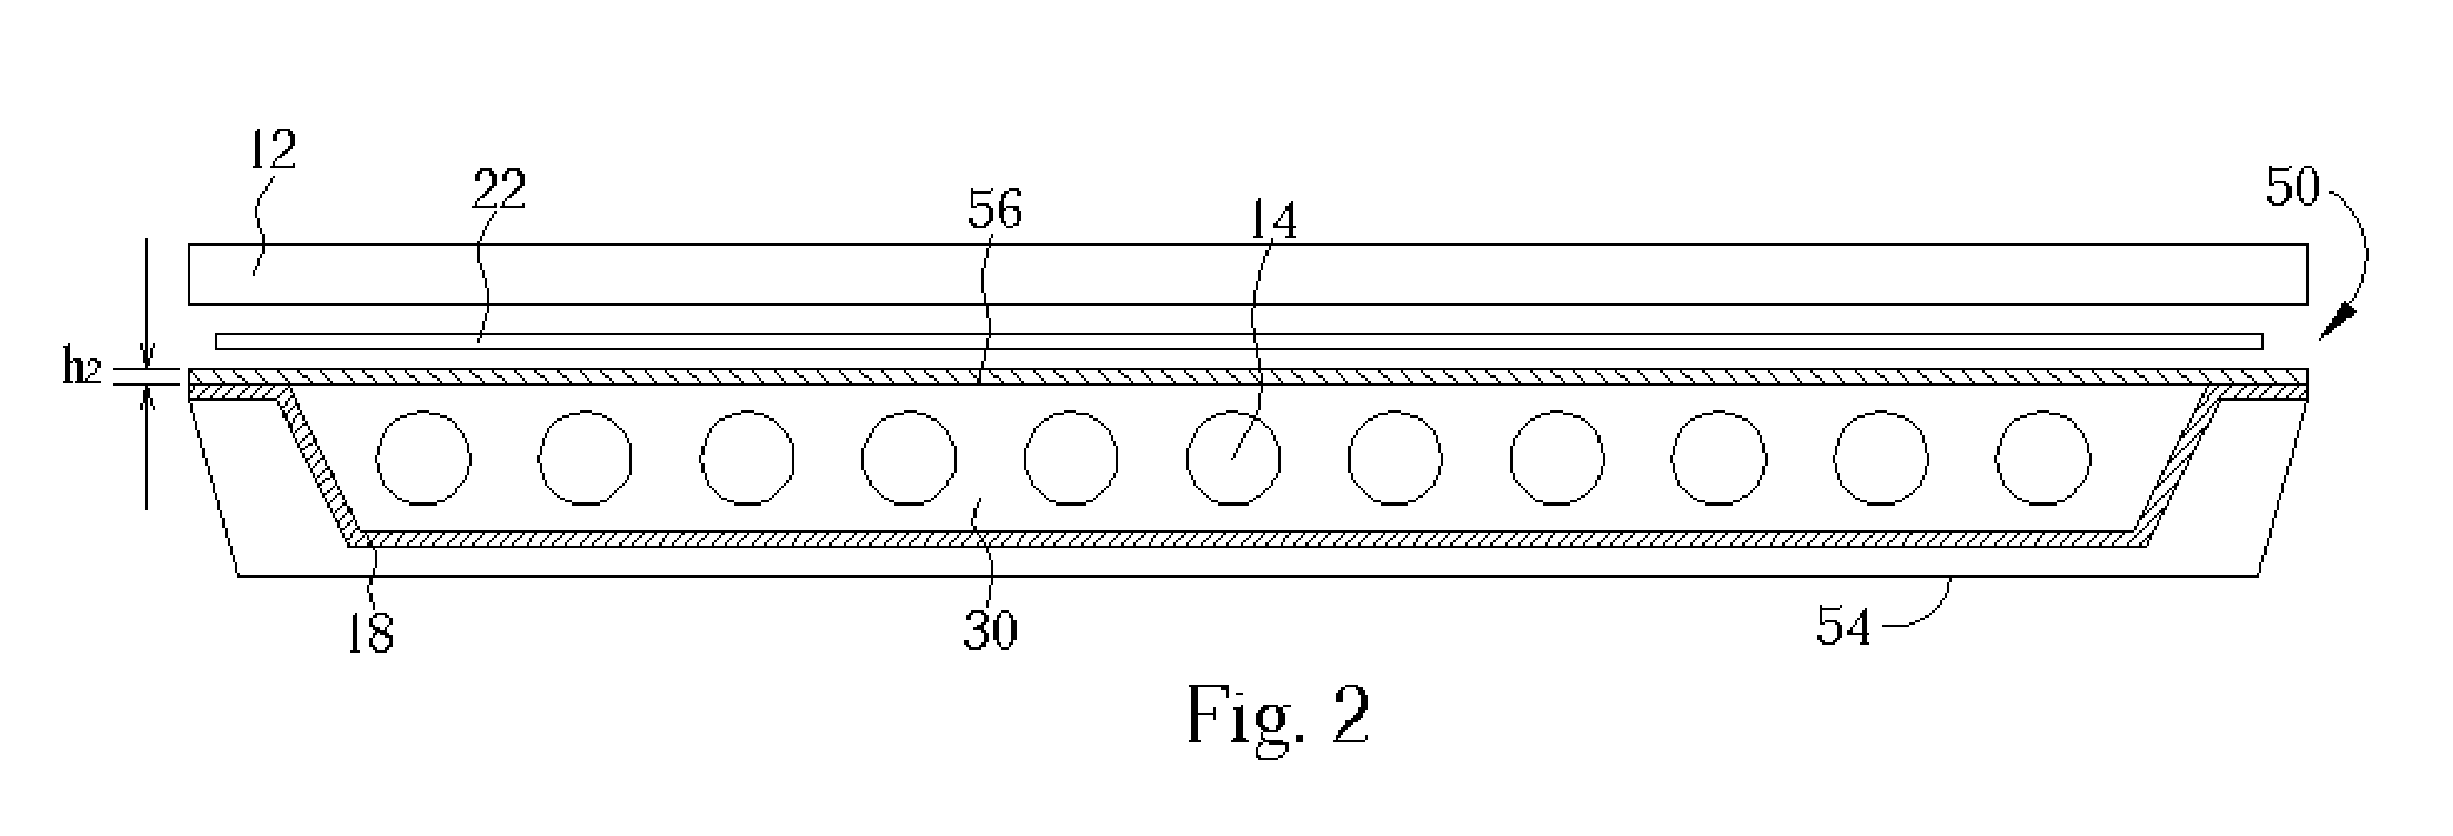 Direct-type backlight unit with diffusion film for flat panel liquid crystal display